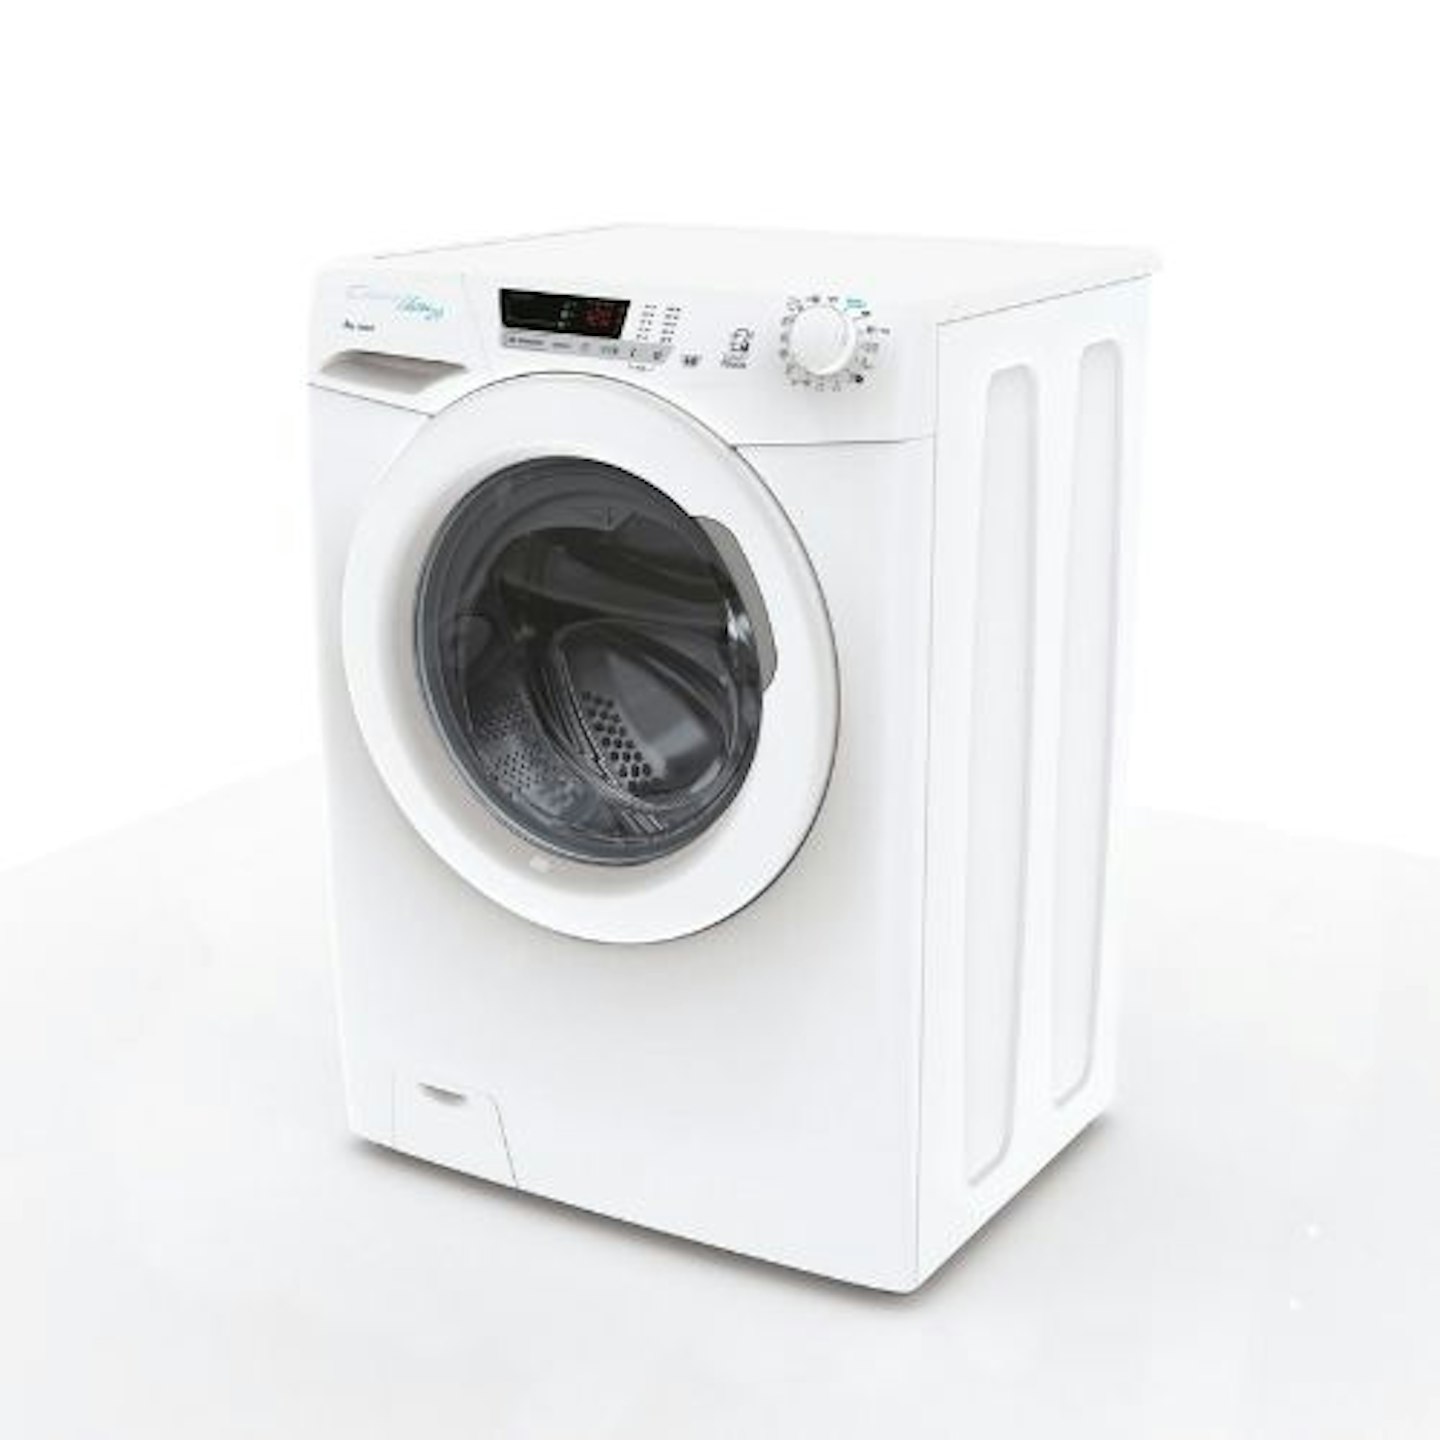 Candy-Ultra-HCU1482DE-Freestanding-Washing-Machine-8kg-Load-1400-rpm-Android-App-Enabled-Eco-Cycles-WaterEnergy-auto-sensing-White